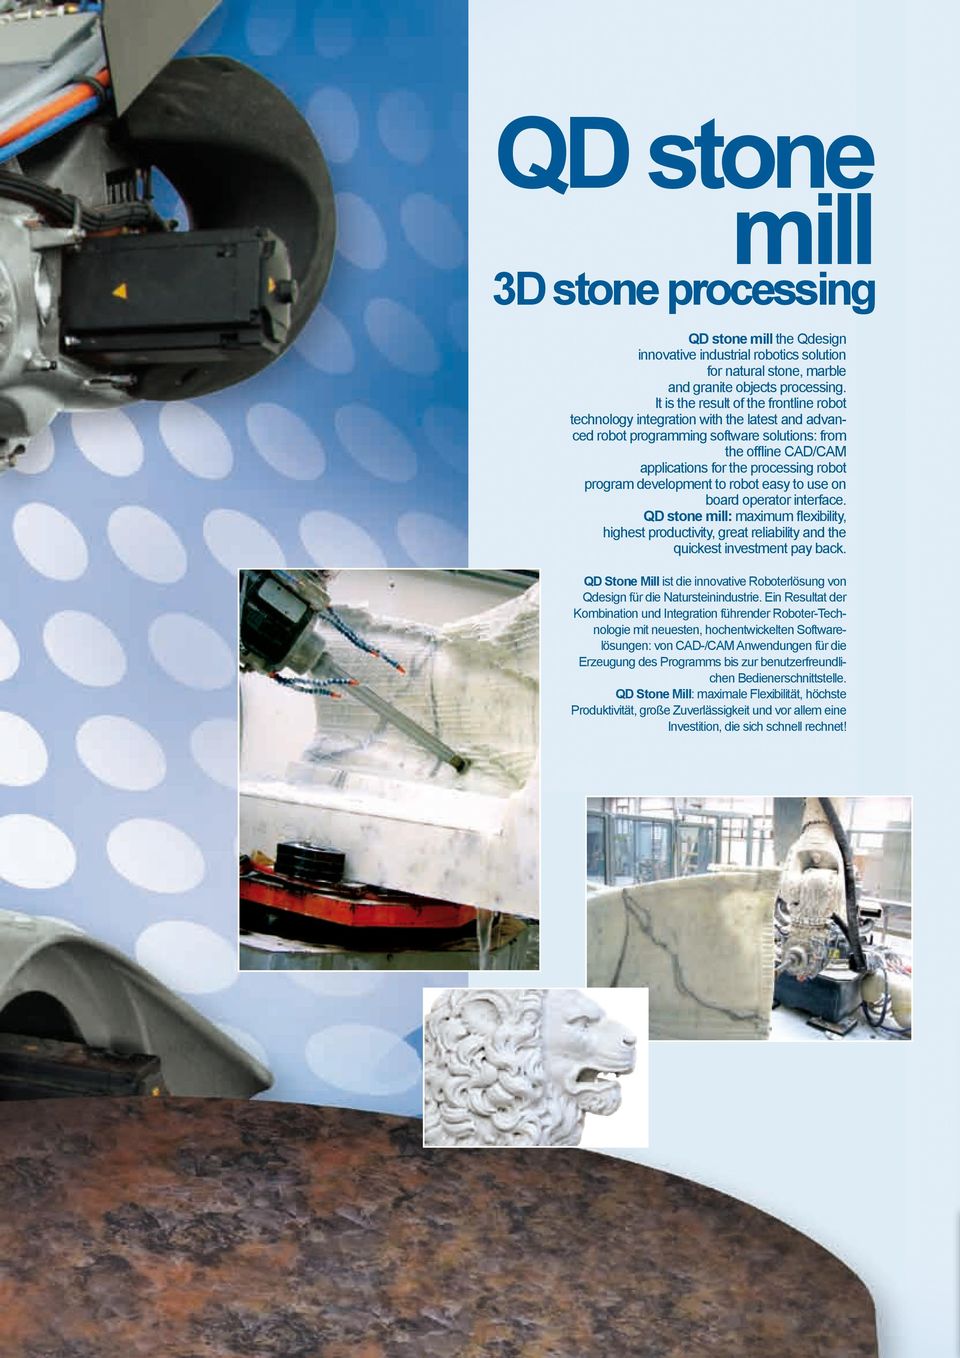 program development to robot easy to use on board operator interface. QD stone mill: maximum flexibility, highest productivity, great reliability and the quickest investment pay back.